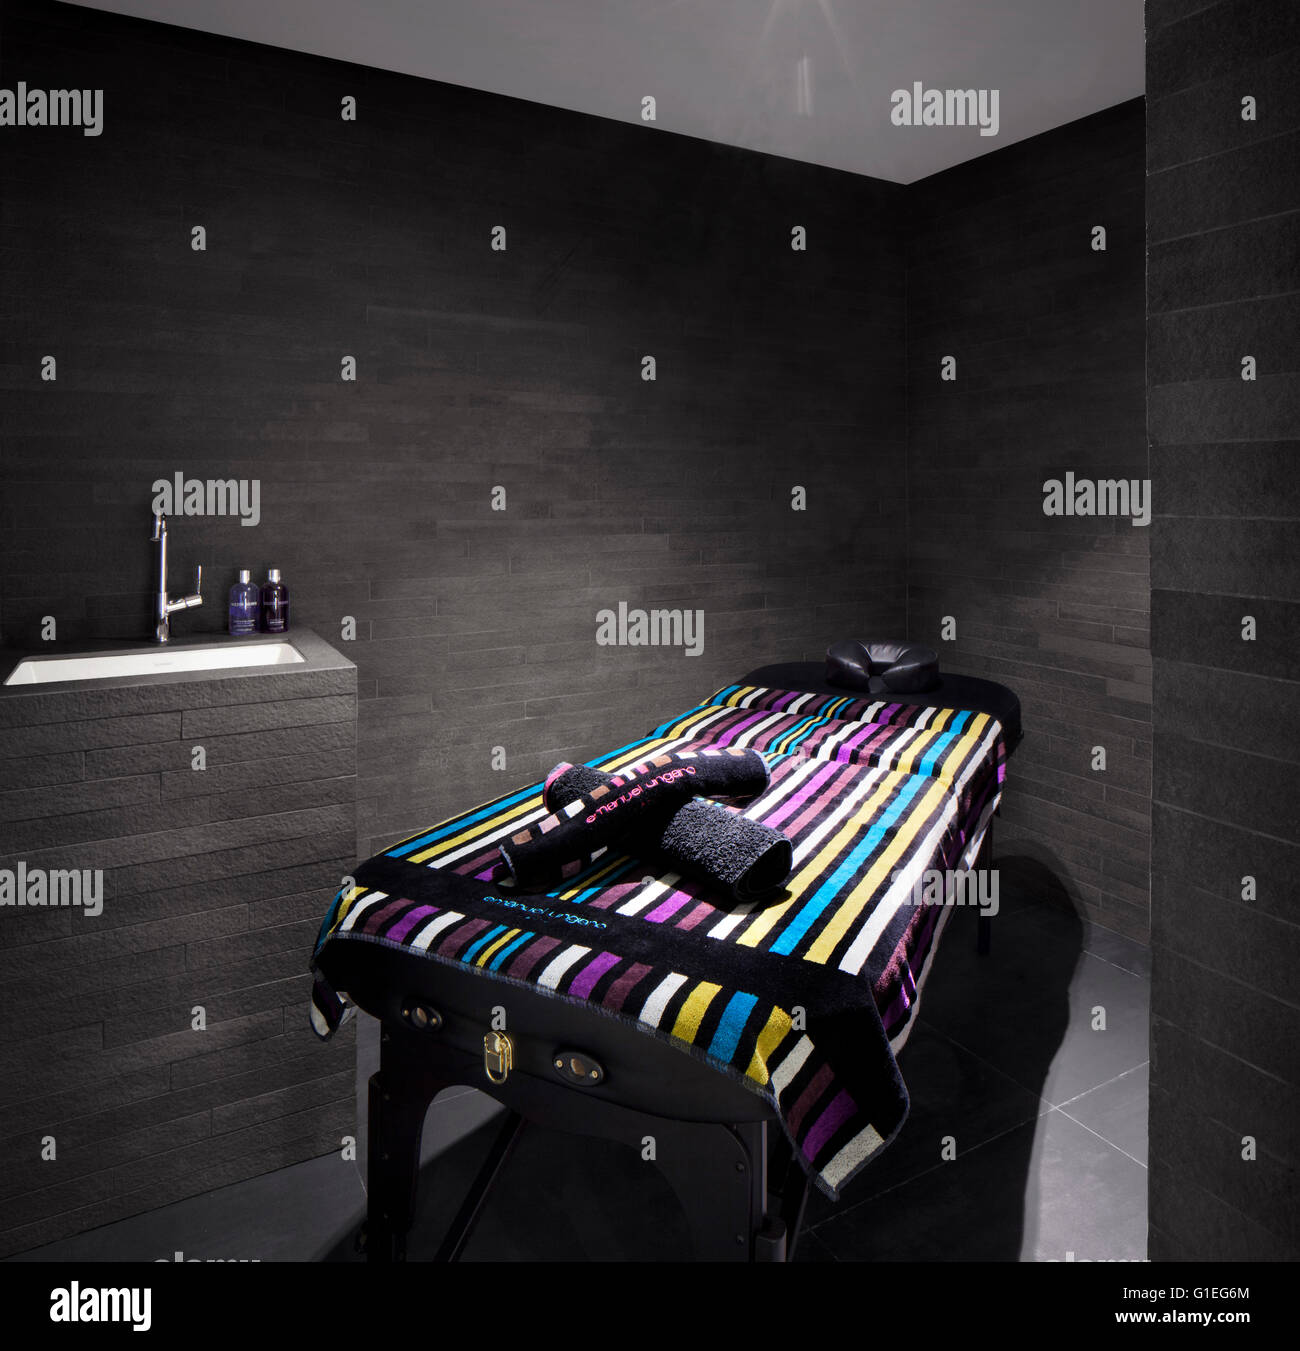 Modern Massage Room with colourful towel and monochrome walls and features. Stock Photo